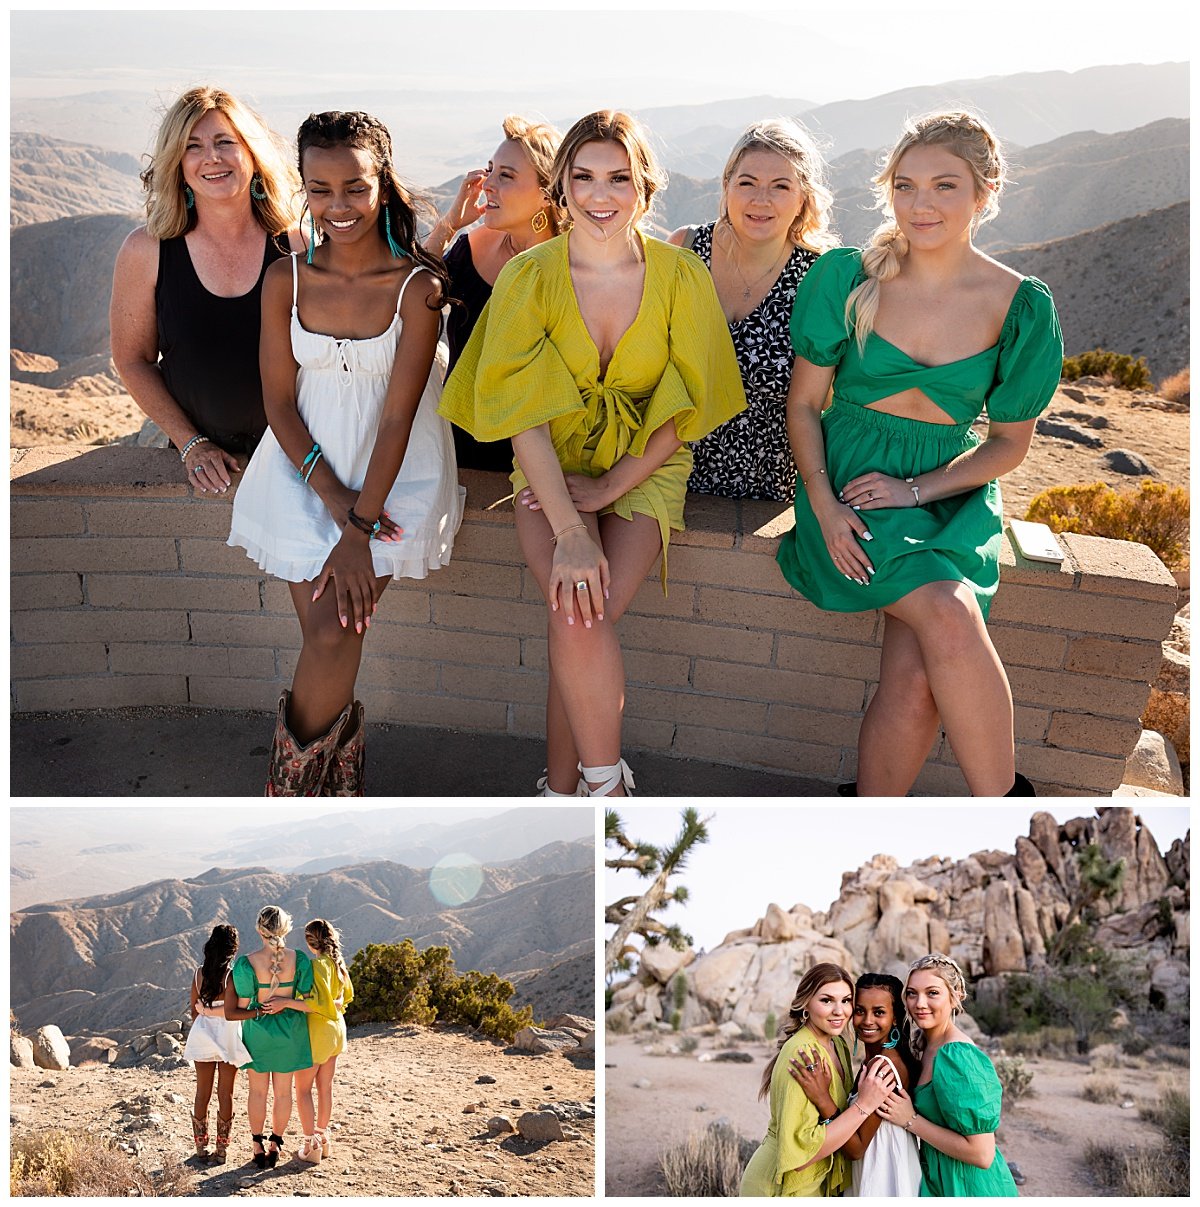 Young women in colorful dresses pose with their mothers overlooking a scenic rock formation in California